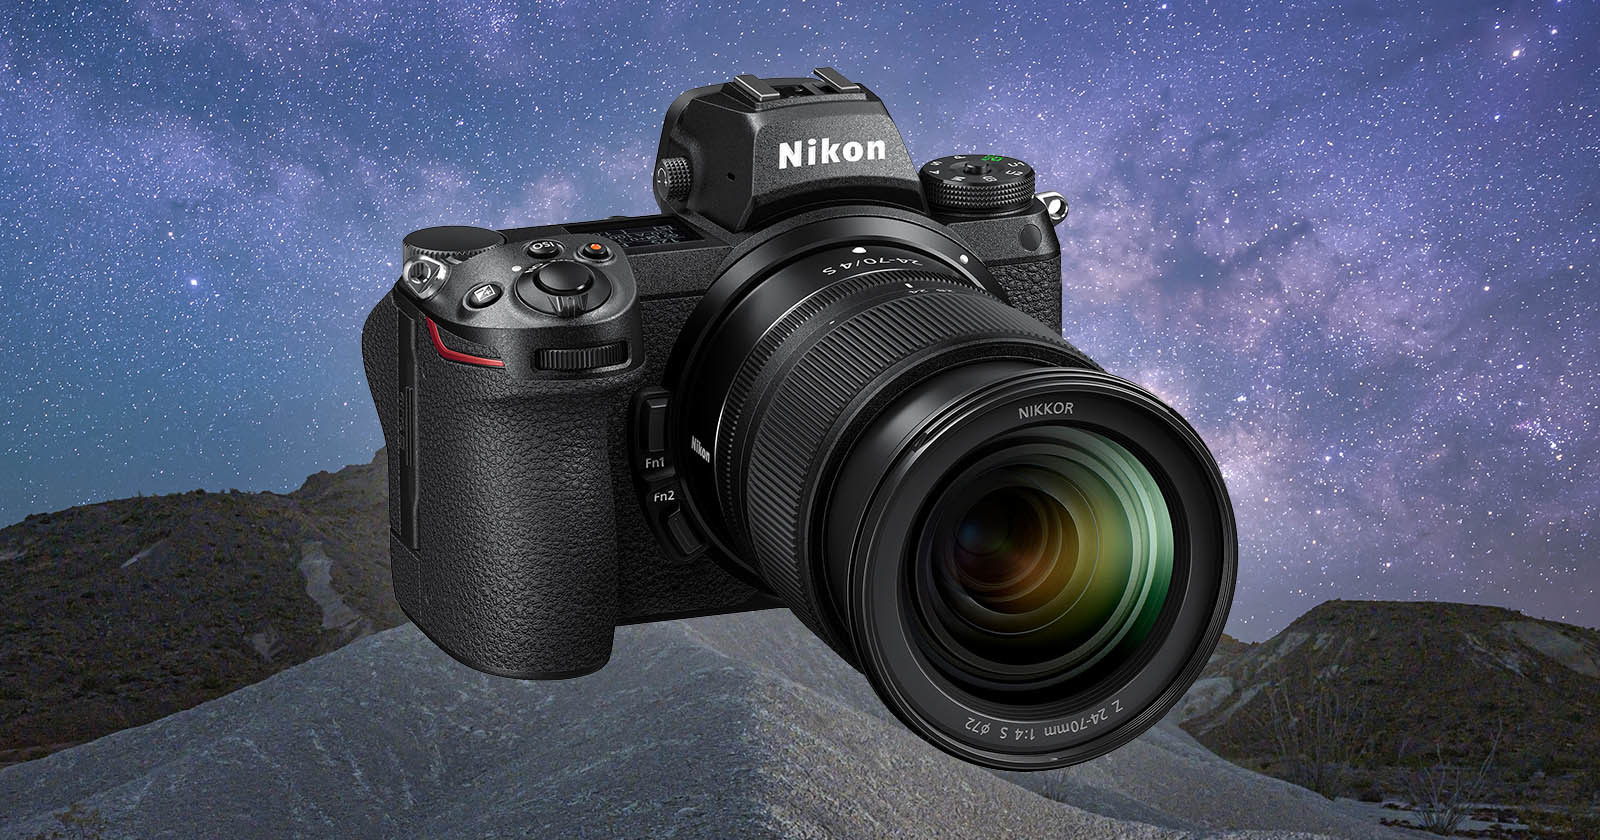  nikon astrophotography nightscape review 